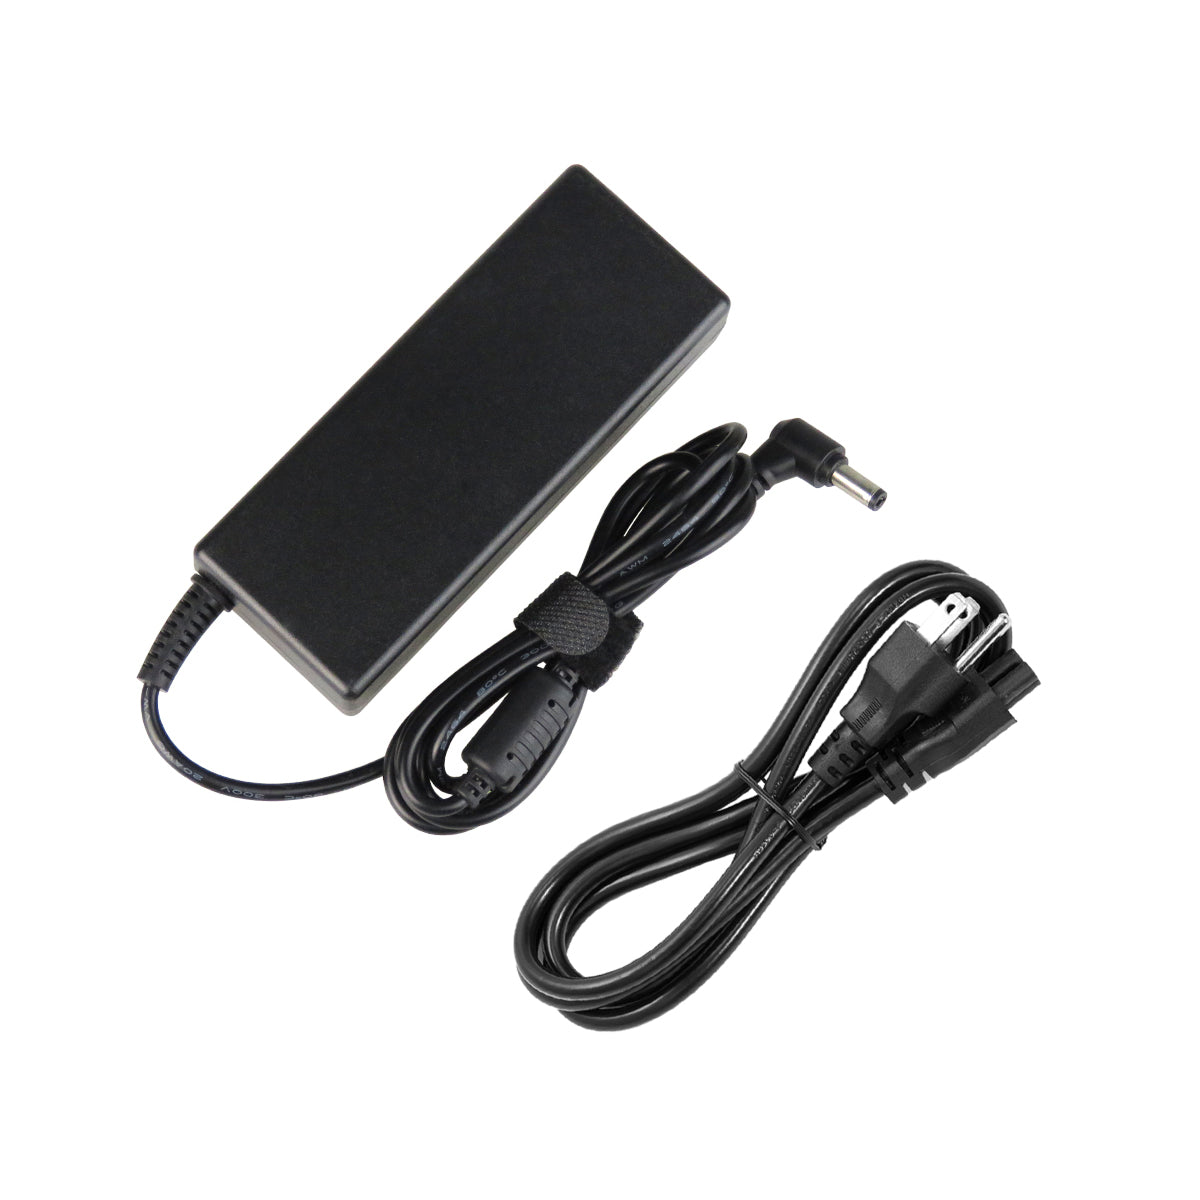 AC Adapter Charger for Toshiba Satellite s55t-a5277 Notebook.